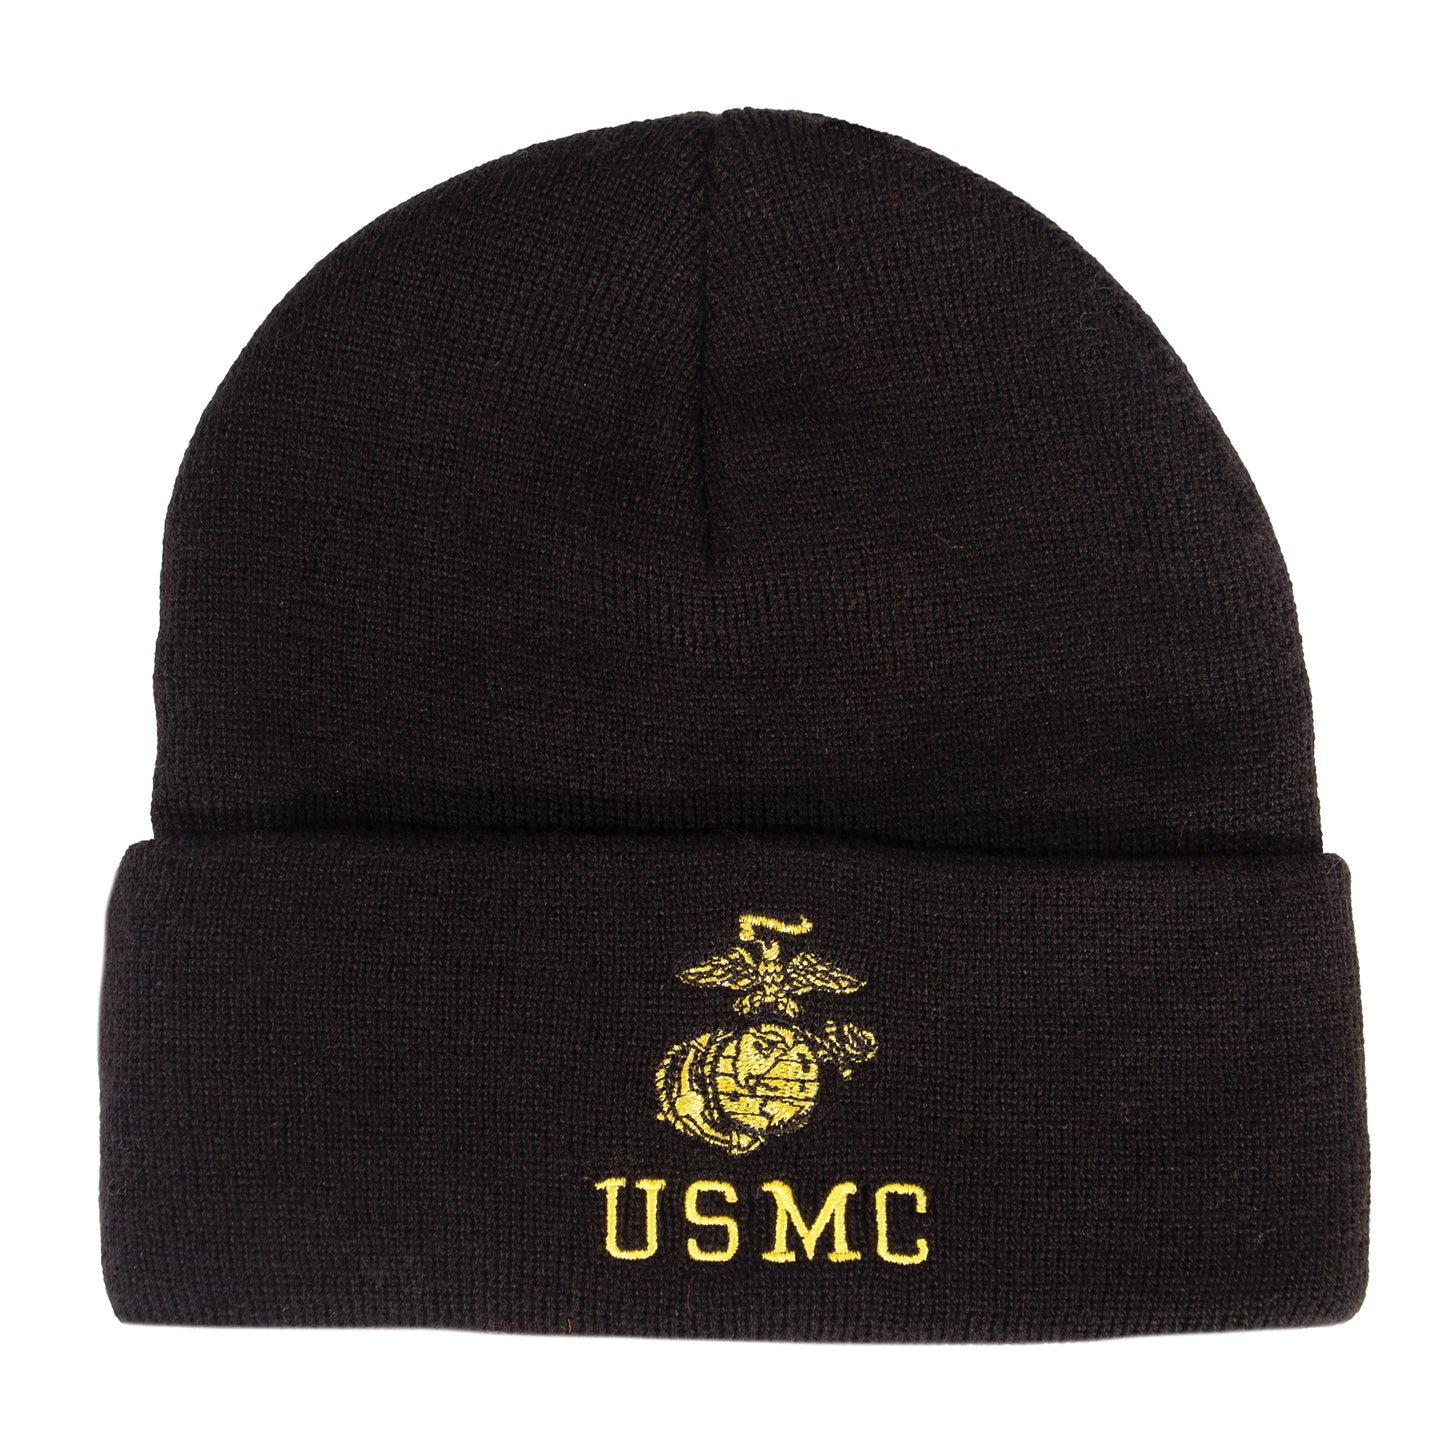 Watch Cap, Embroidered USMC and Eagle, Globe, and Anchor (EGA)